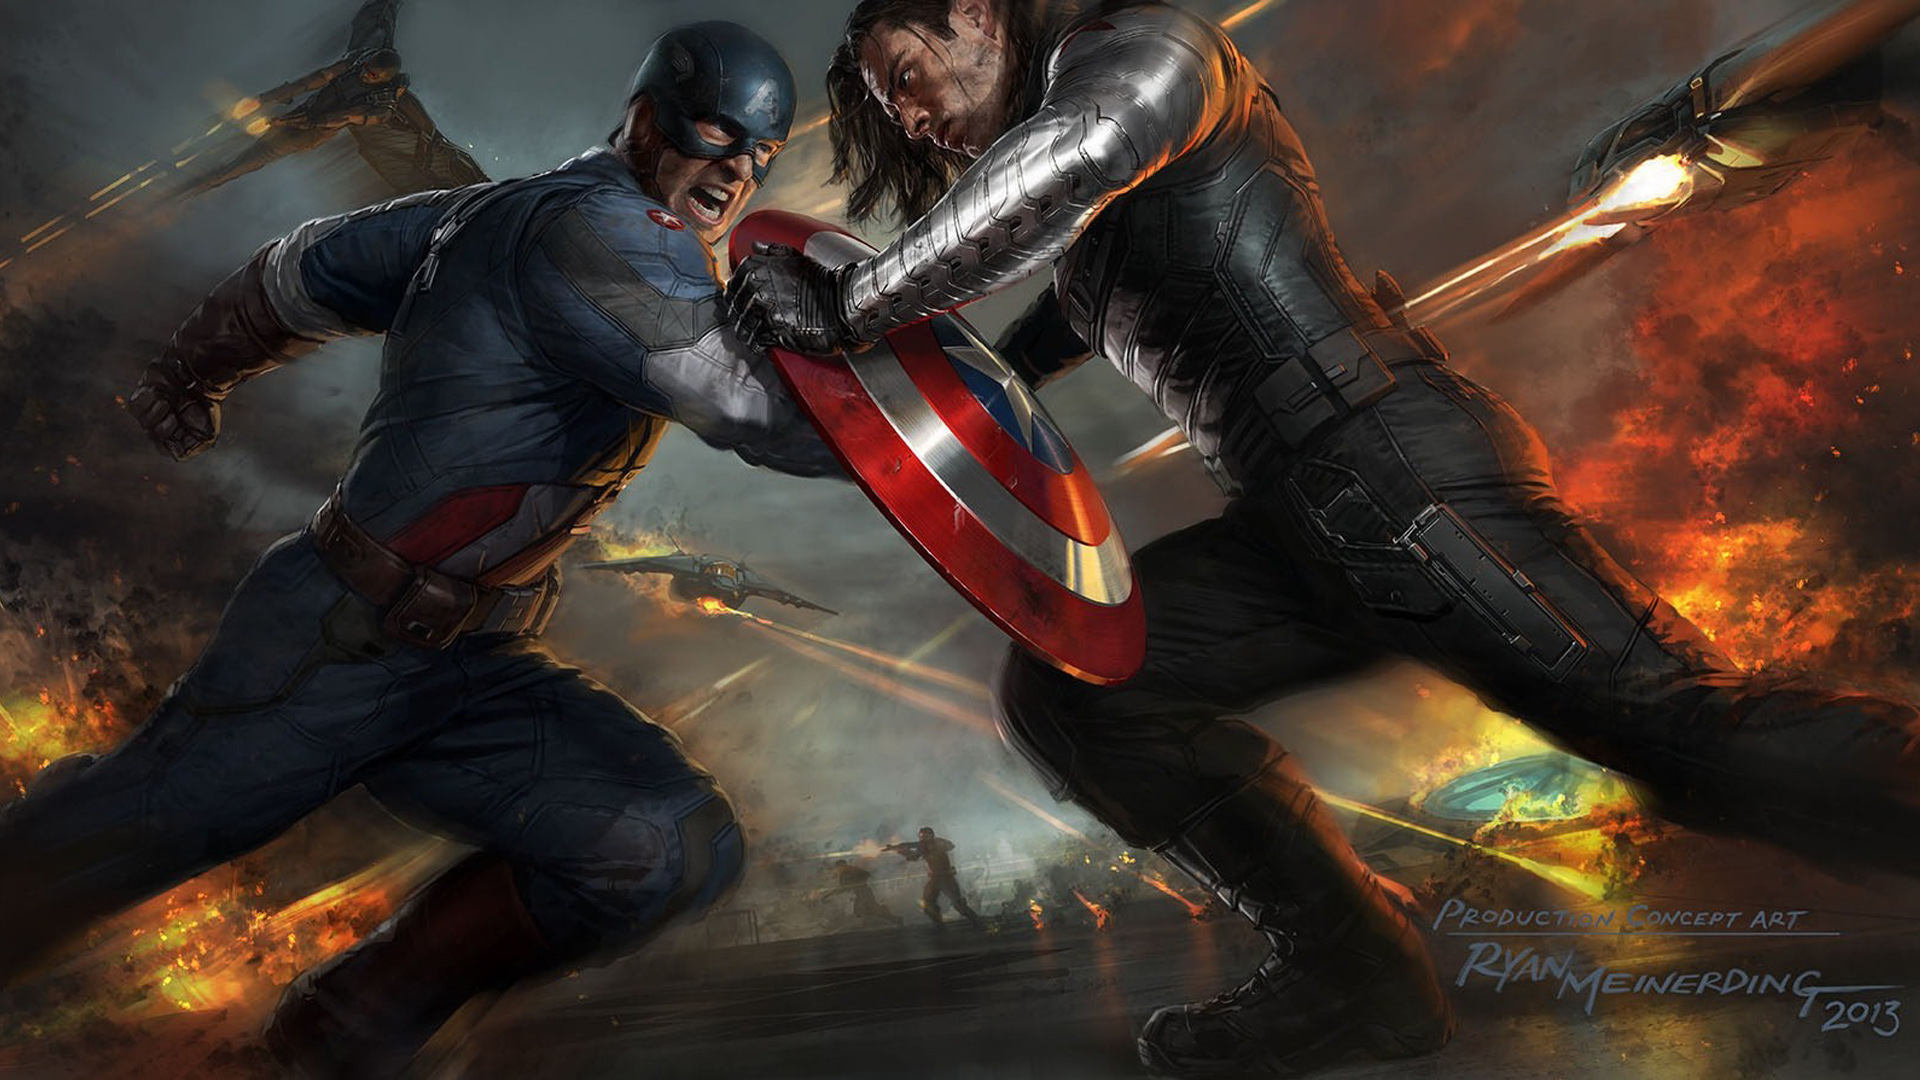 Captain America The Winter Soldier Artwork Wallpapers HD Wallpapers 1920x1080